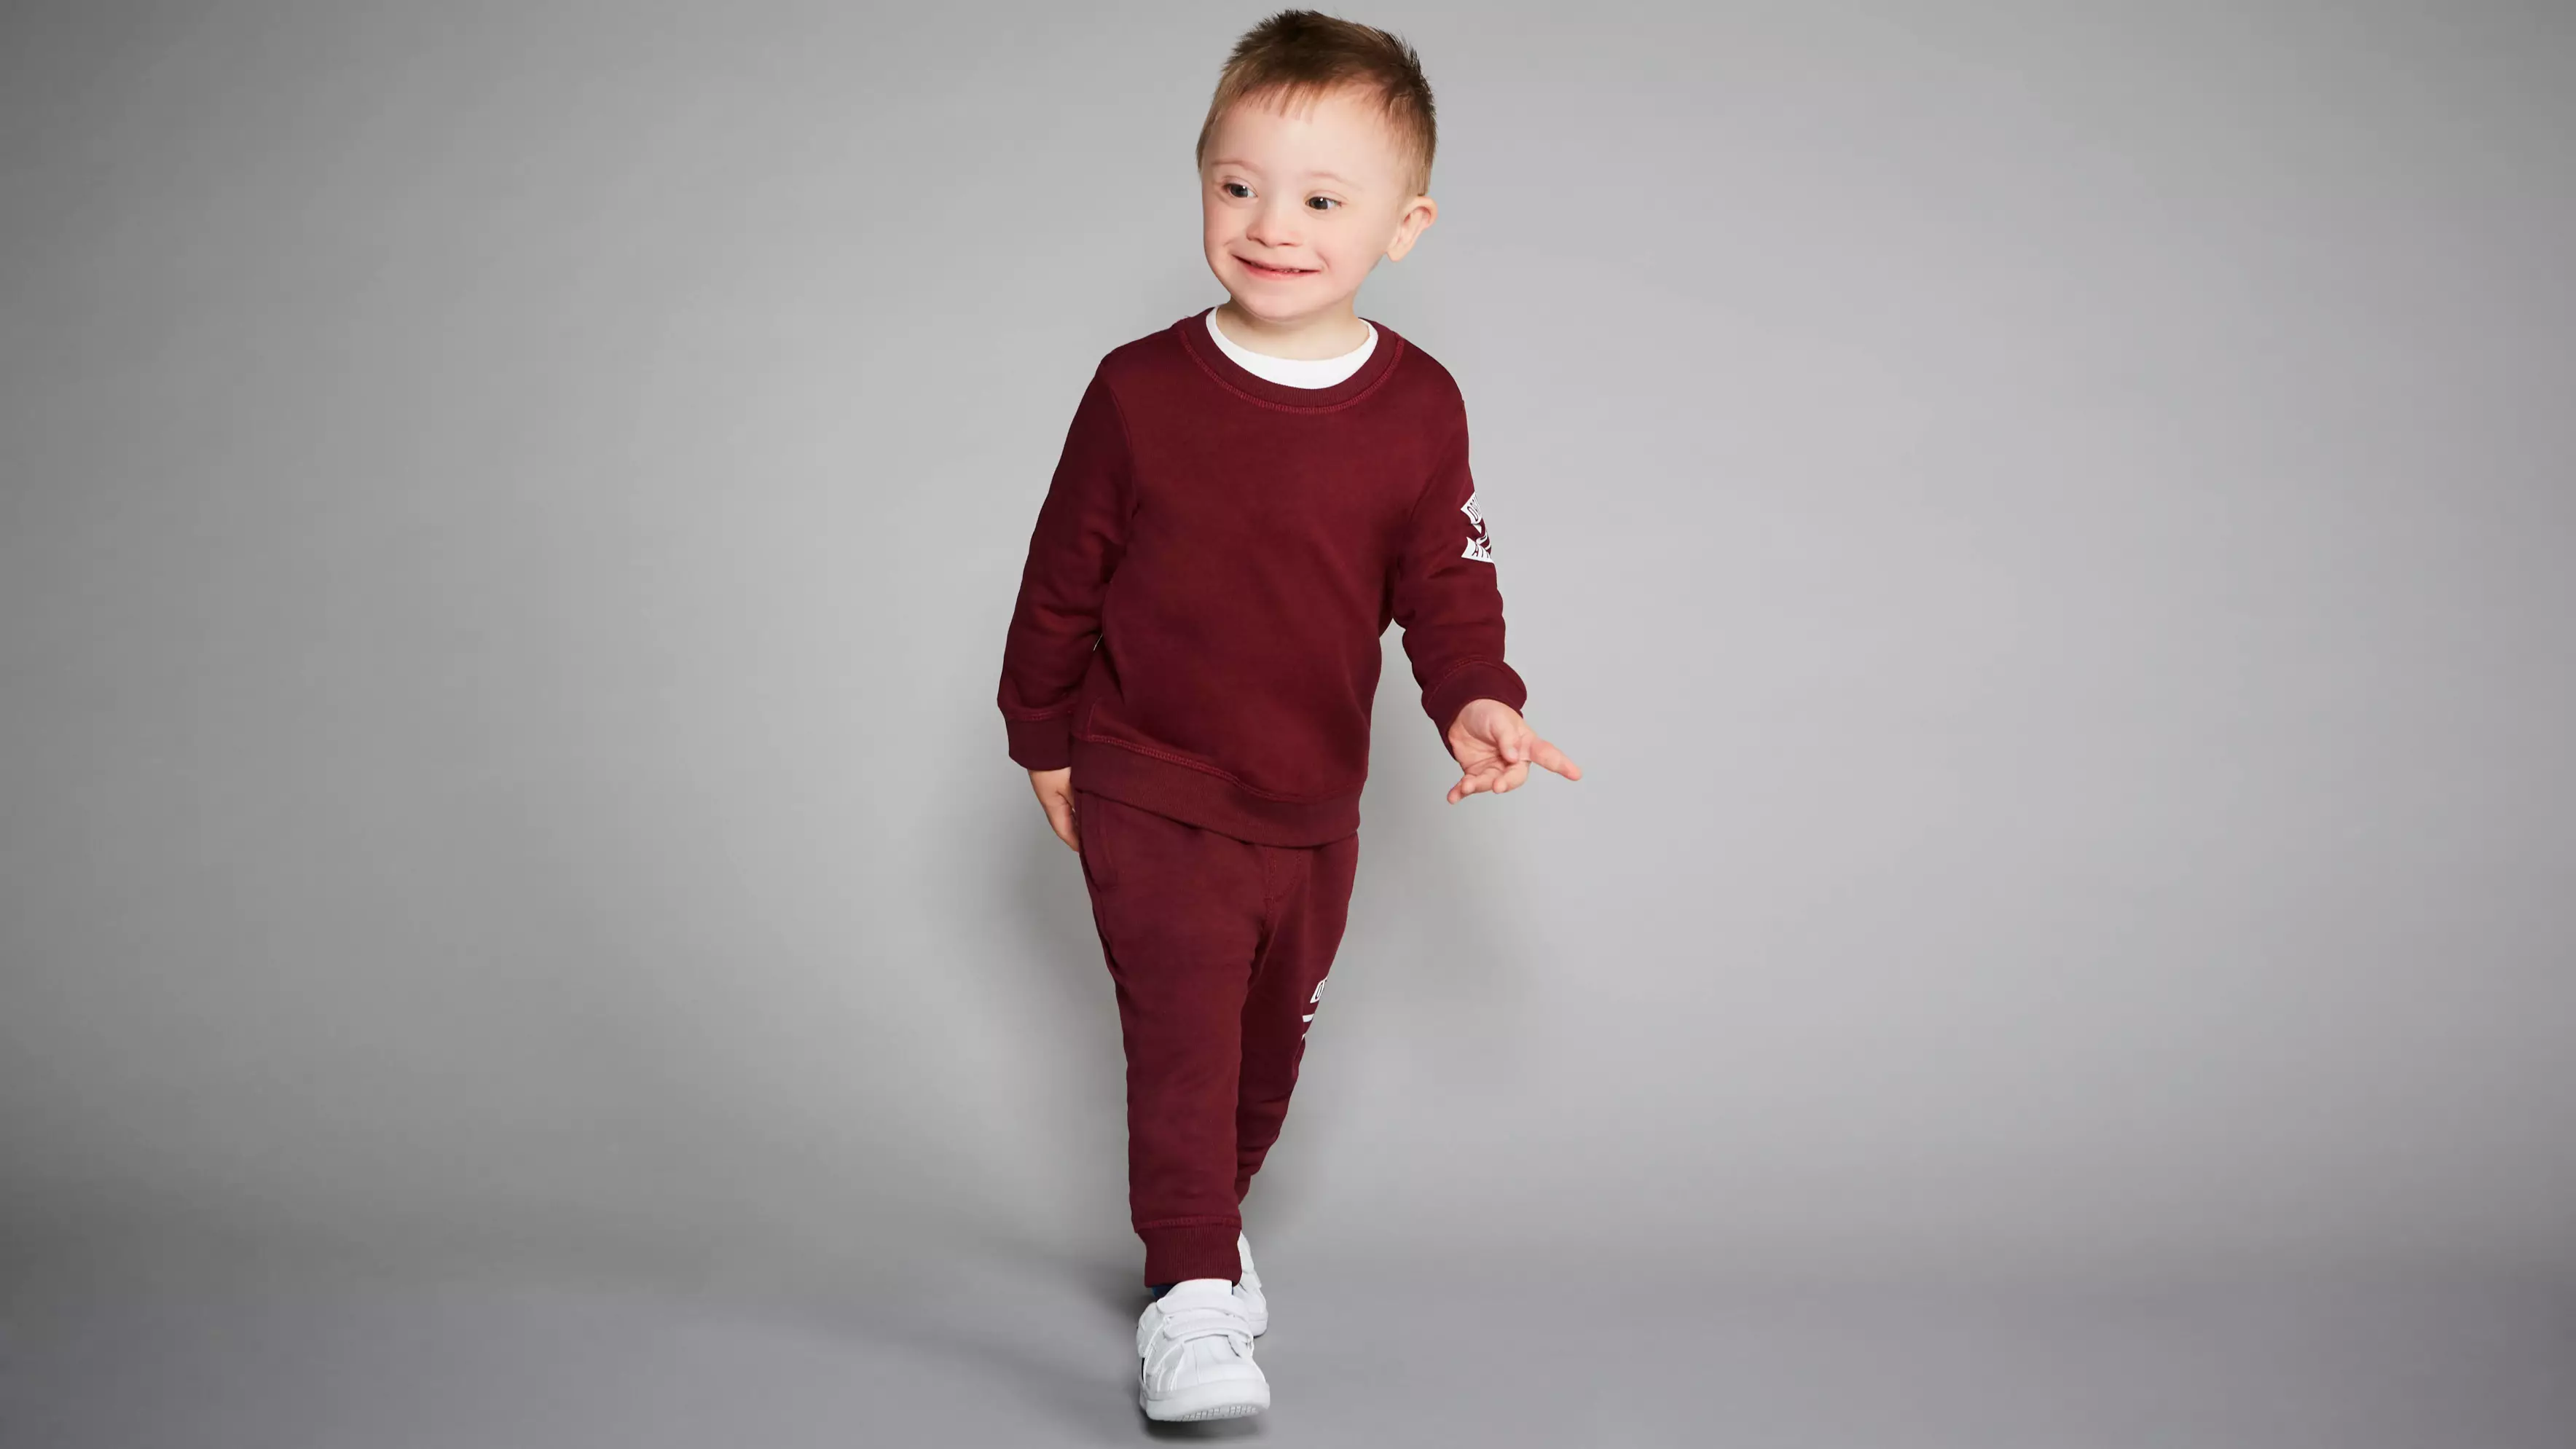 Four-Year-Old Boy With Down Syndrome Lands Modelling Job